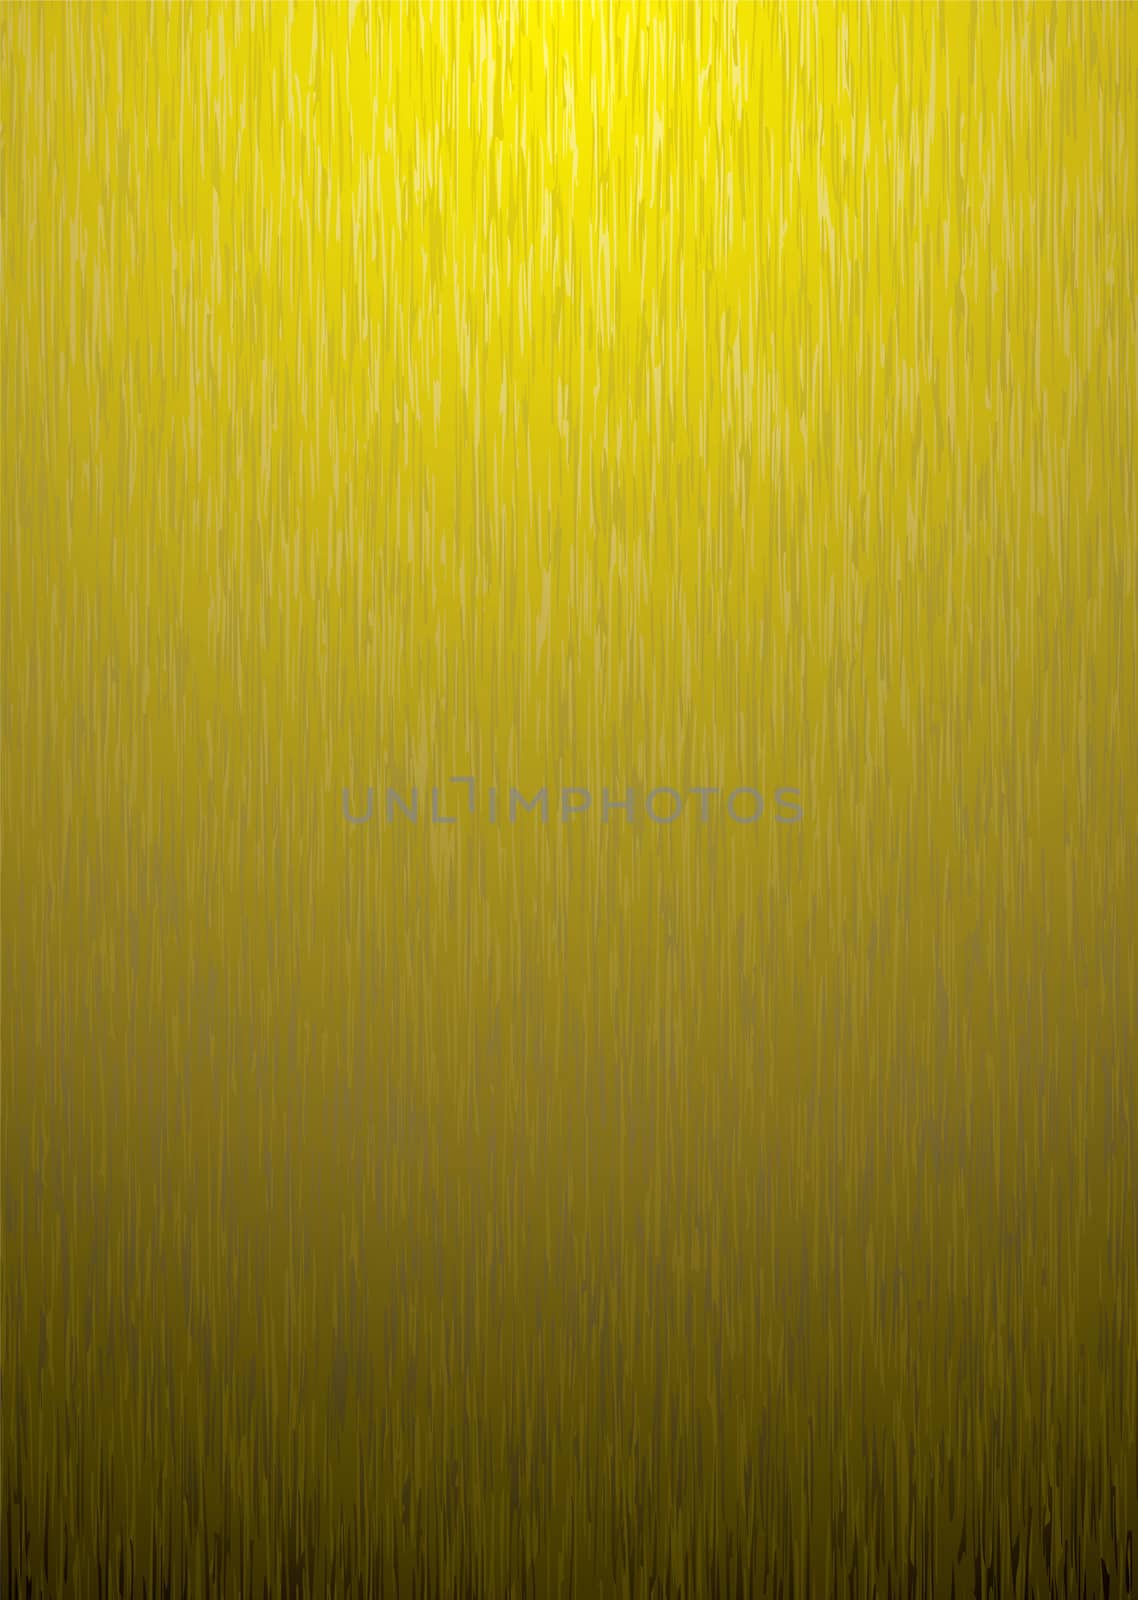 Brushed gold metal background with grain effect ideal desktop picture